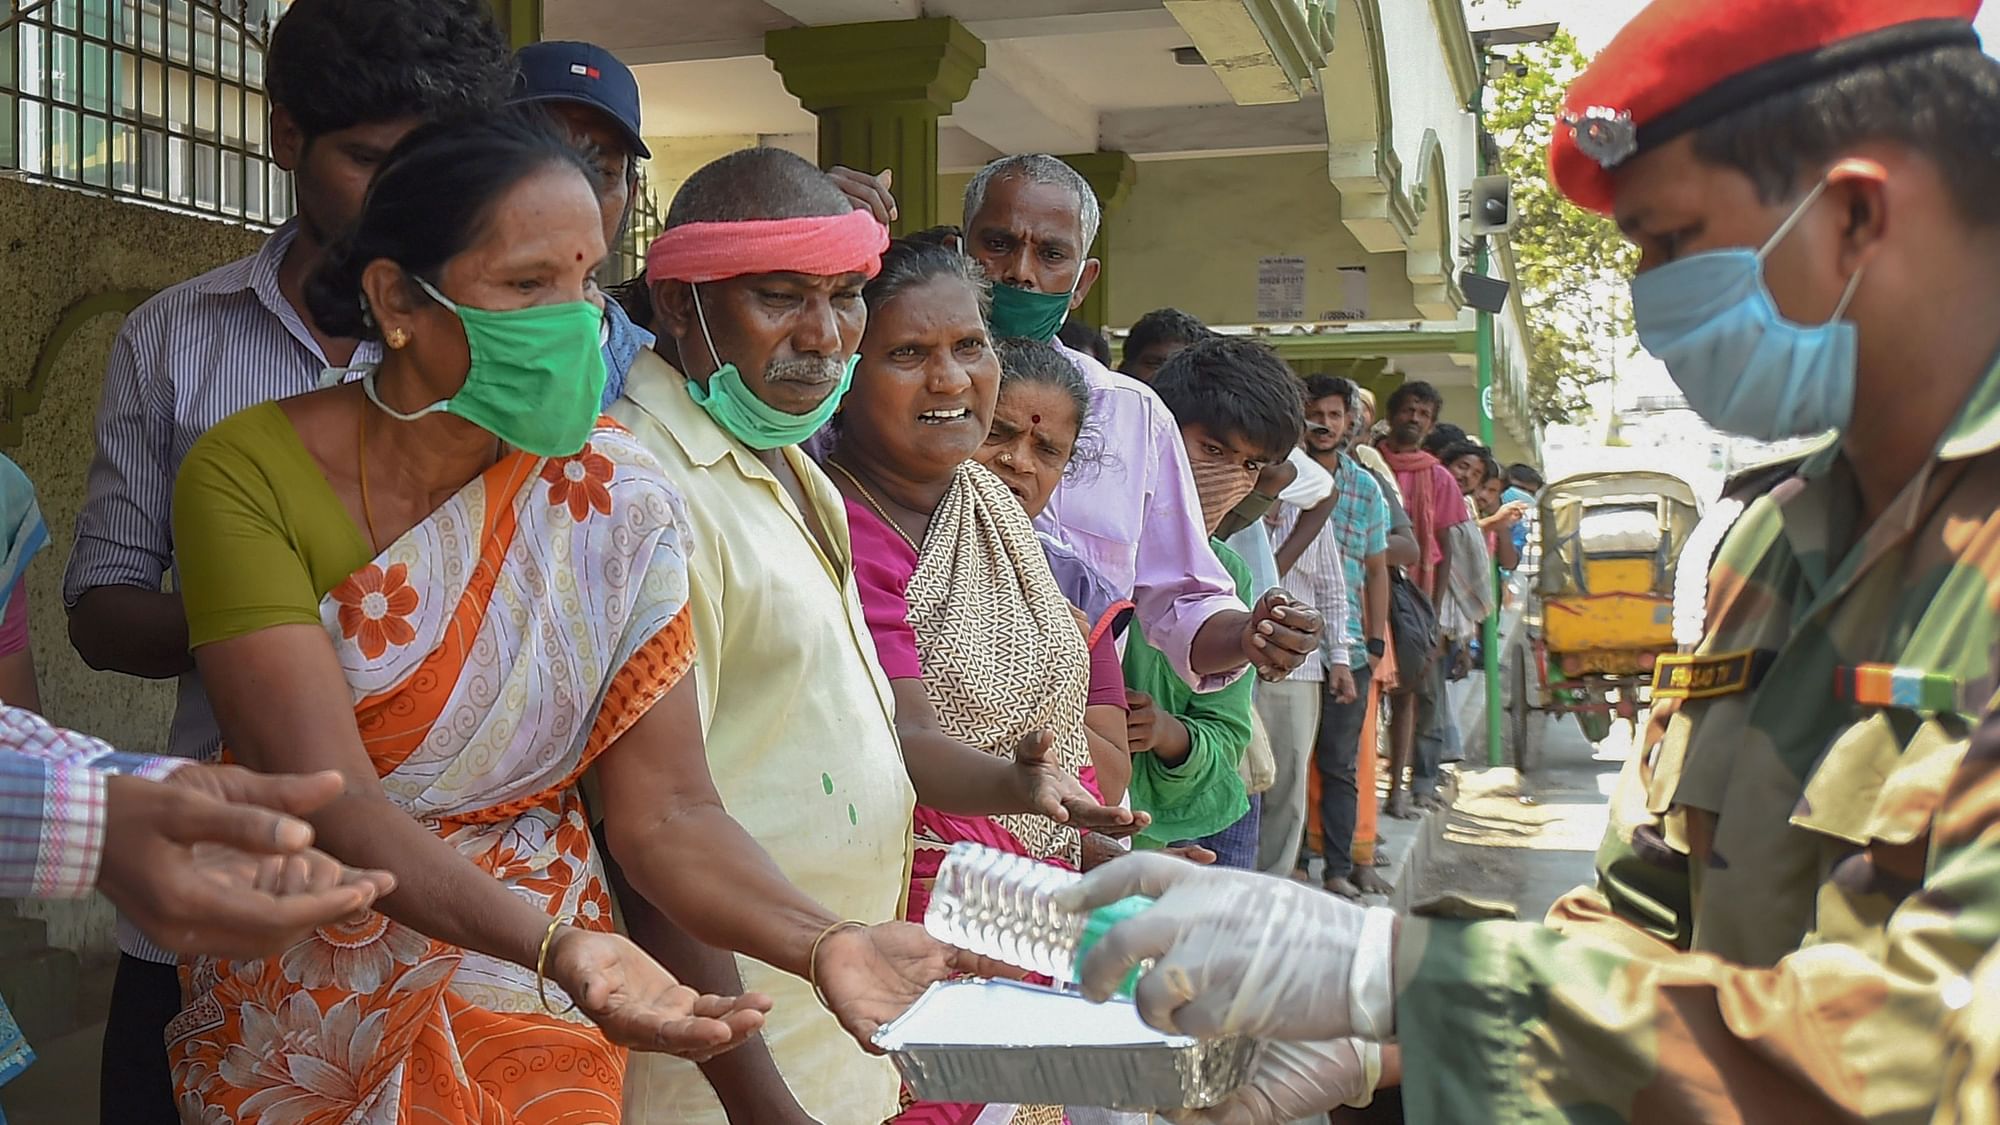 Army personnel distribute packaged food among the homeless and needy people during the nationwide lockdown, in wake of the coronavirus pandemic, in Chennai.